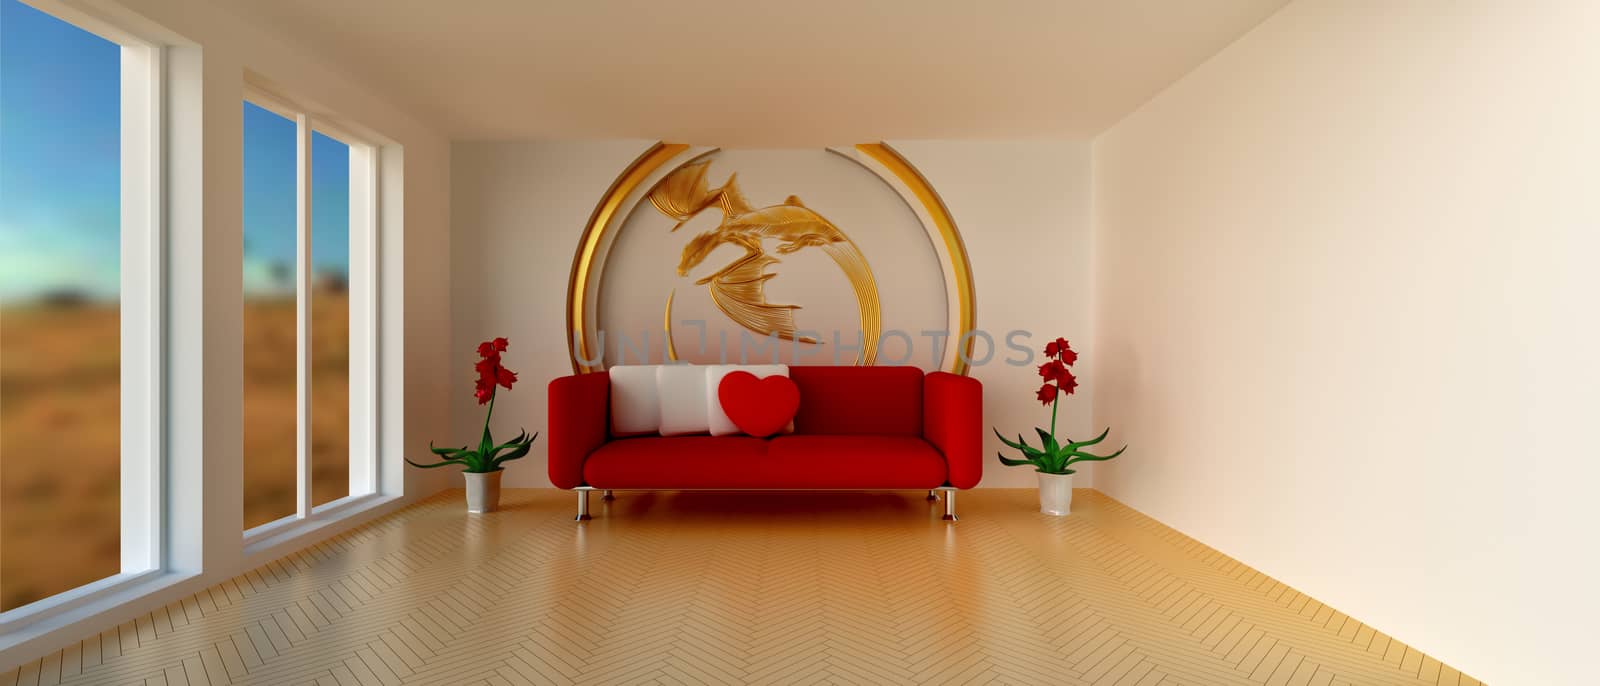 Empty sunny stylish minimalist modern living room with red sofa and white cushion, red heart-shaped pillow, red flowers and golden dragon decoration on the wall. 21:9 proportions. 3D rendering.